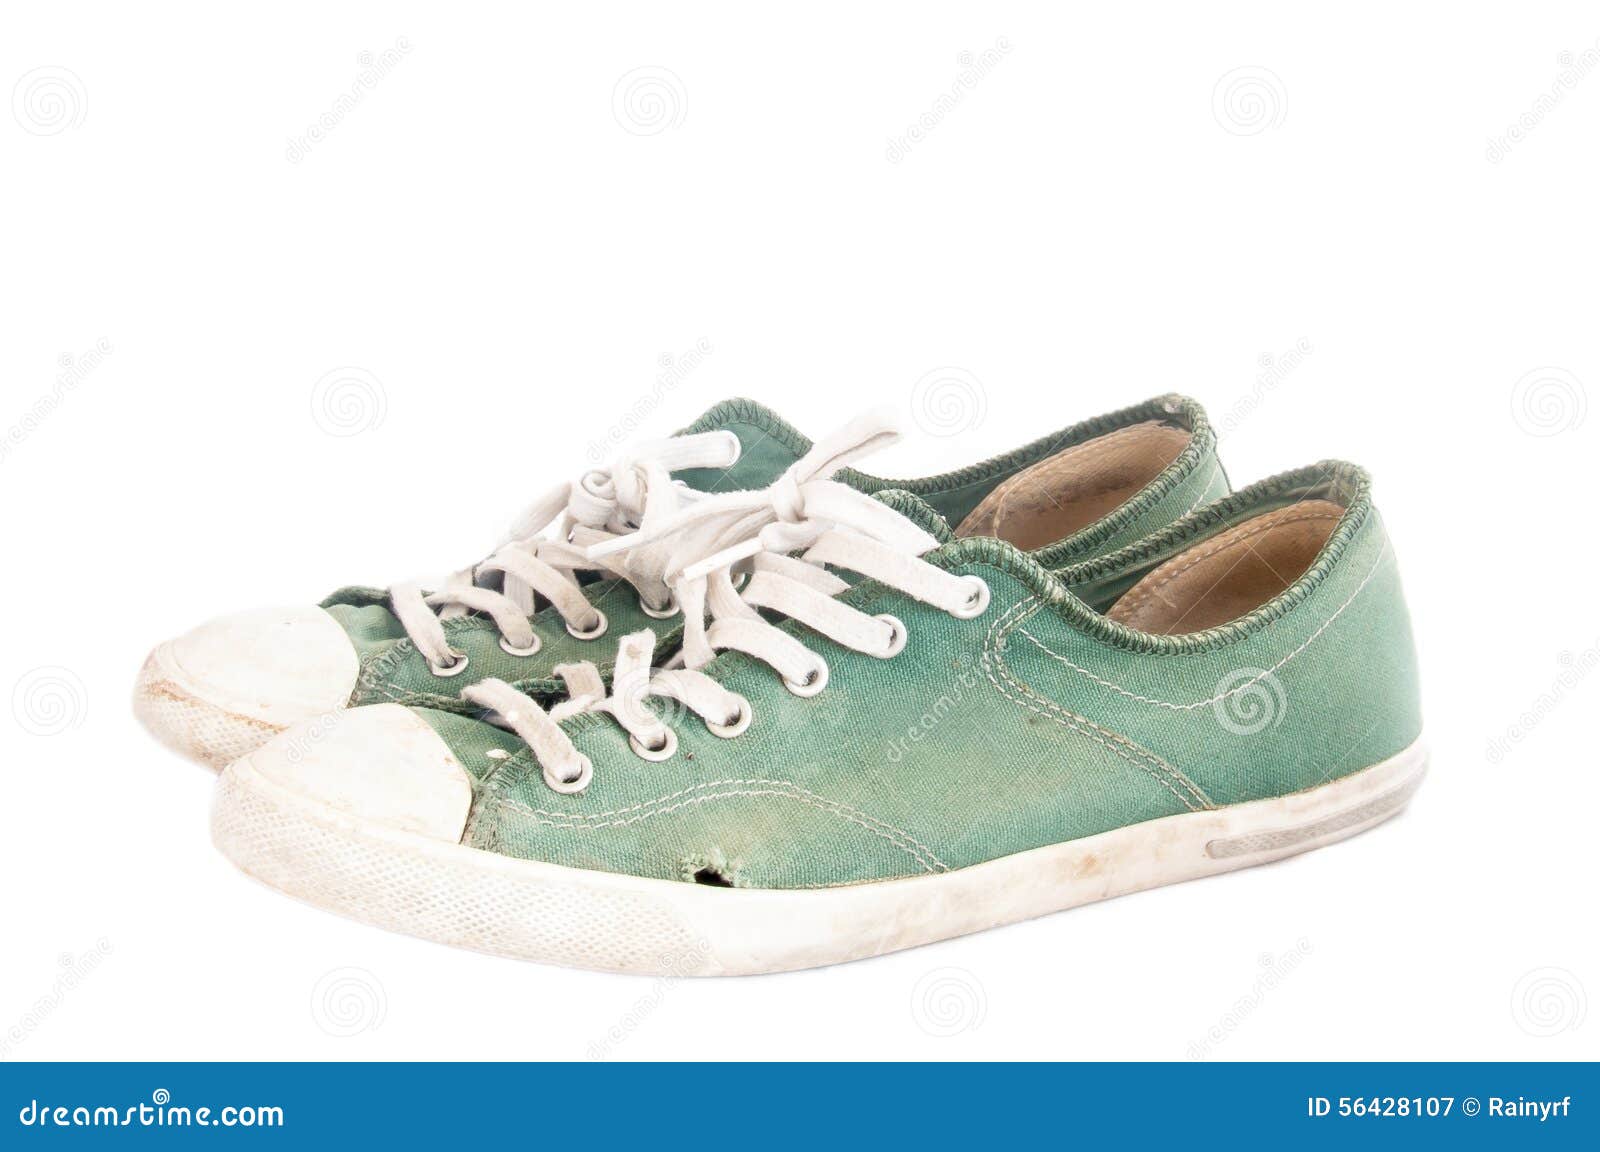 Used Shoes stock image. Image of skate, brown, sneakers - 56428107